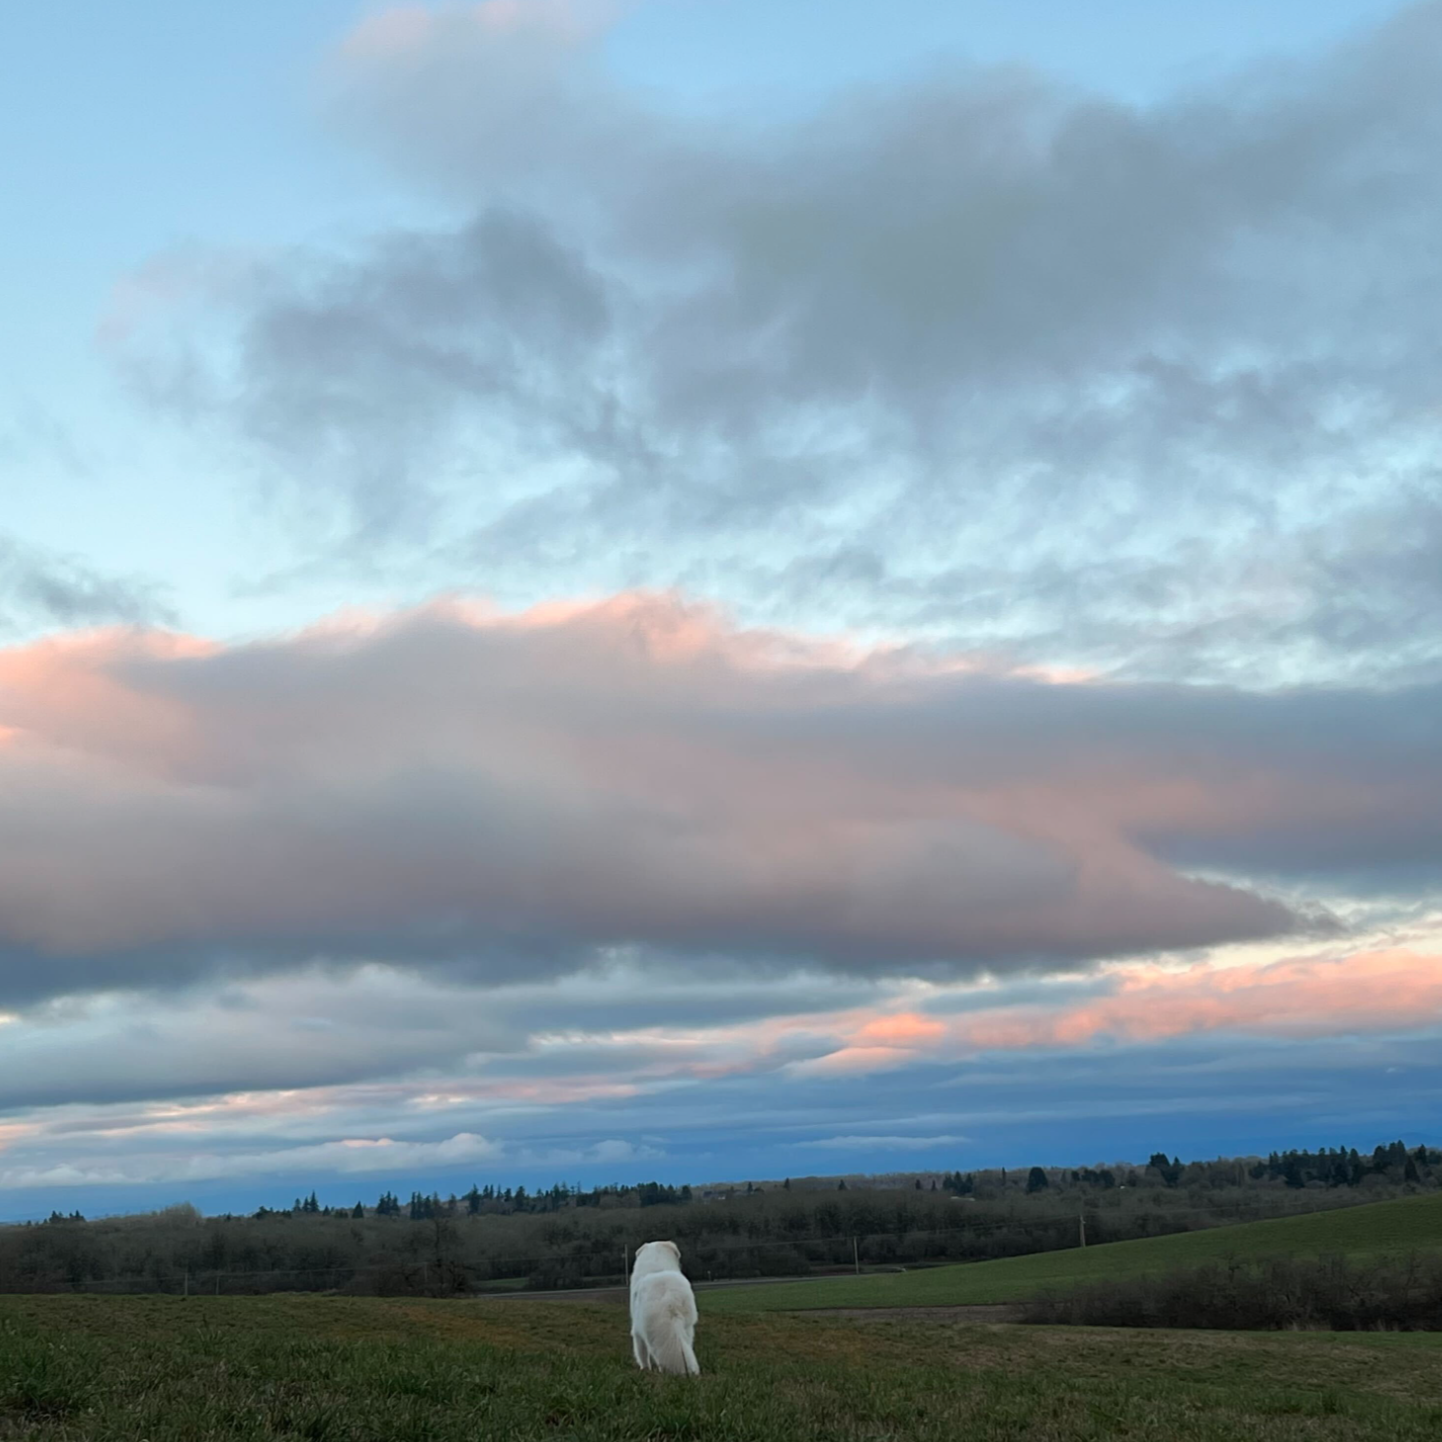 One of our lab pets, Lucy, enjoying a sunset view in Corvallis.